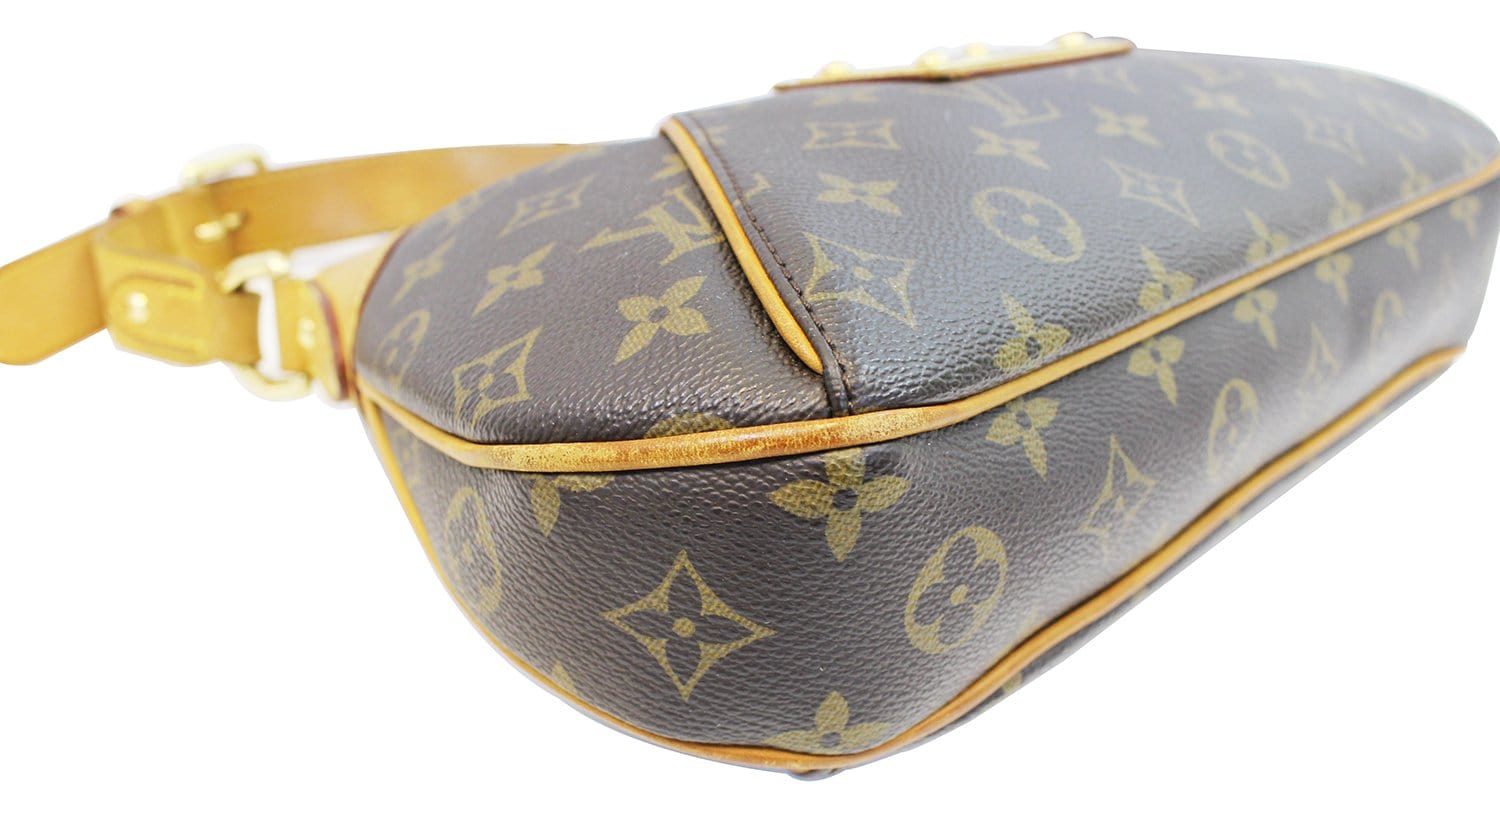 Reowned - Louis Vuitton Thames PM Monogram❣️ Shop our feed at reowned.eu  Link in bio! We are not affiliated to the brands we sell. . . .  #cyprusshopping #preloved #vintage #secondhand #preownedluxury #